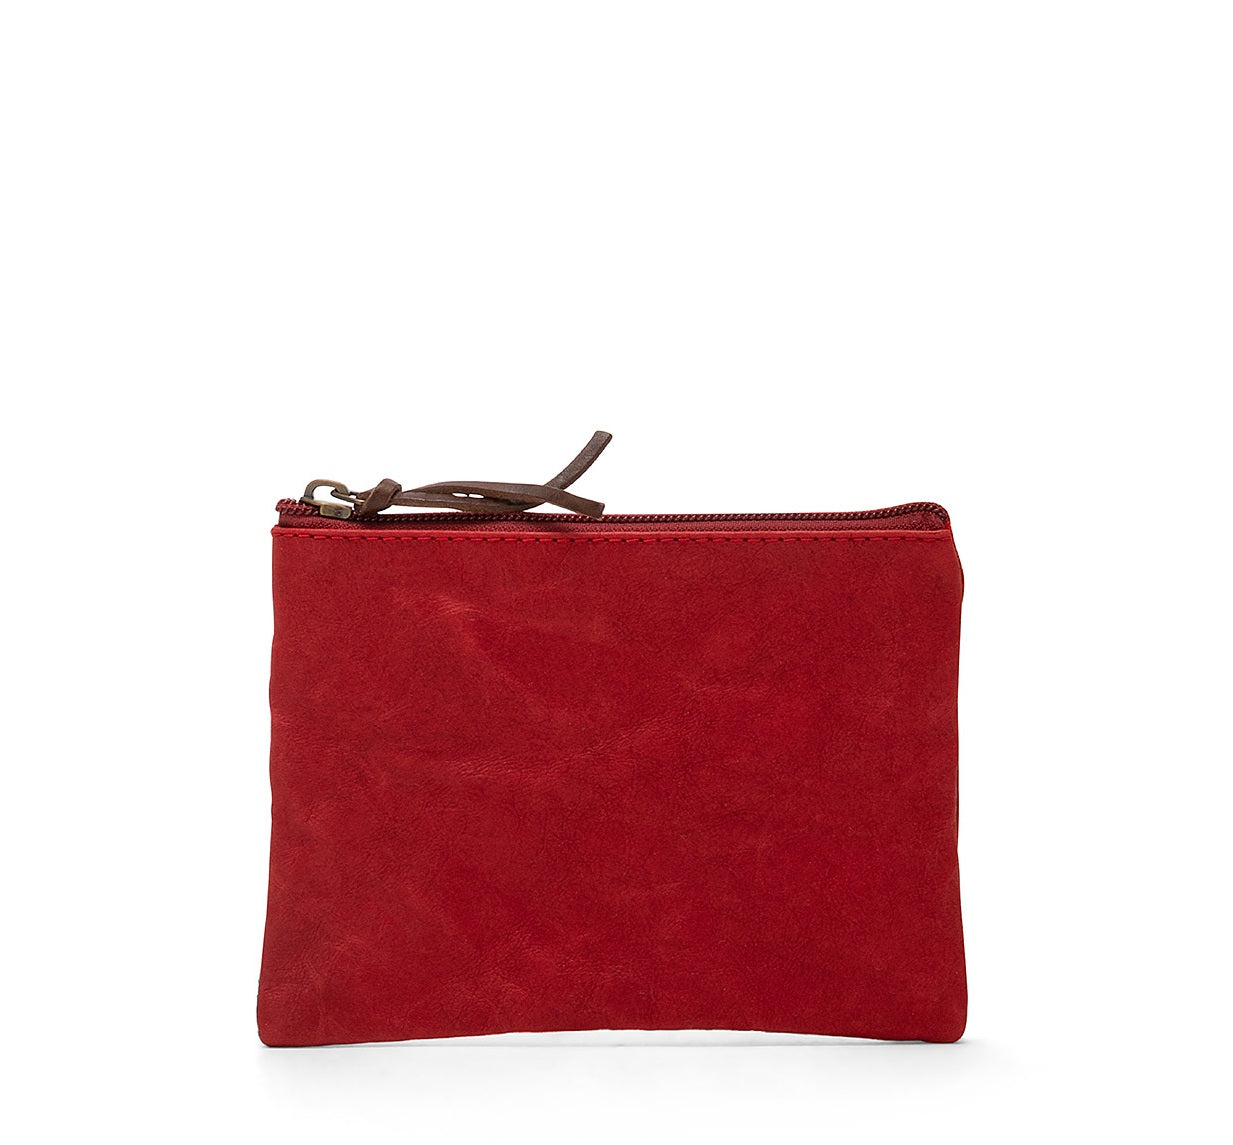 Perfect Bridal Anise Slate Grey Suede Clutch Bag